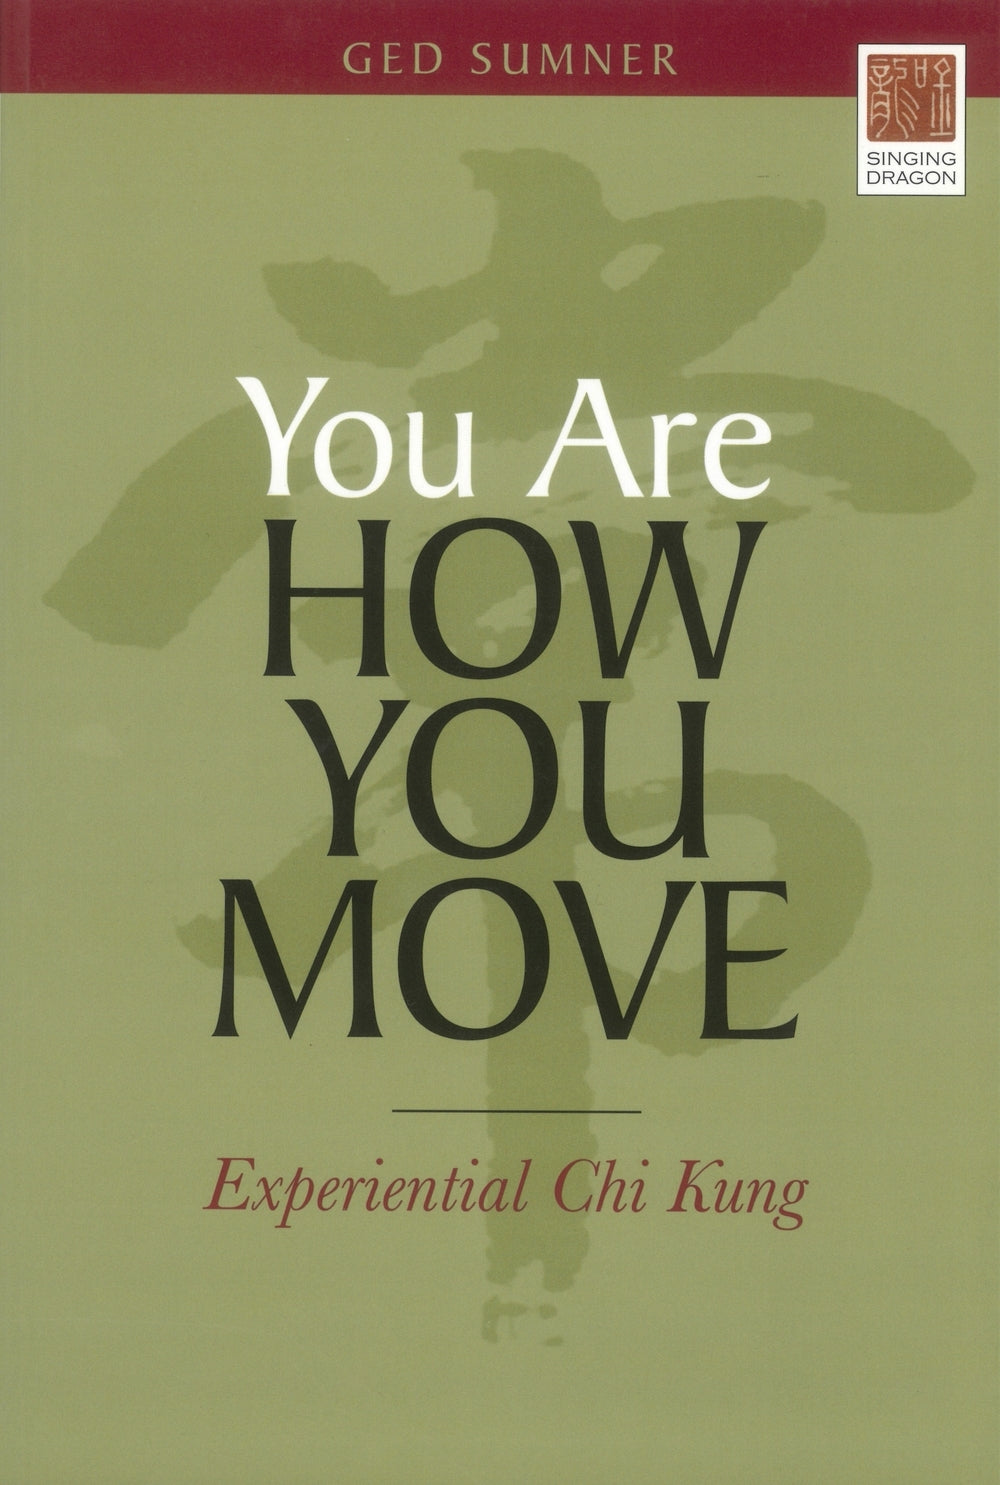 You Are How You Move by Ged Sumner